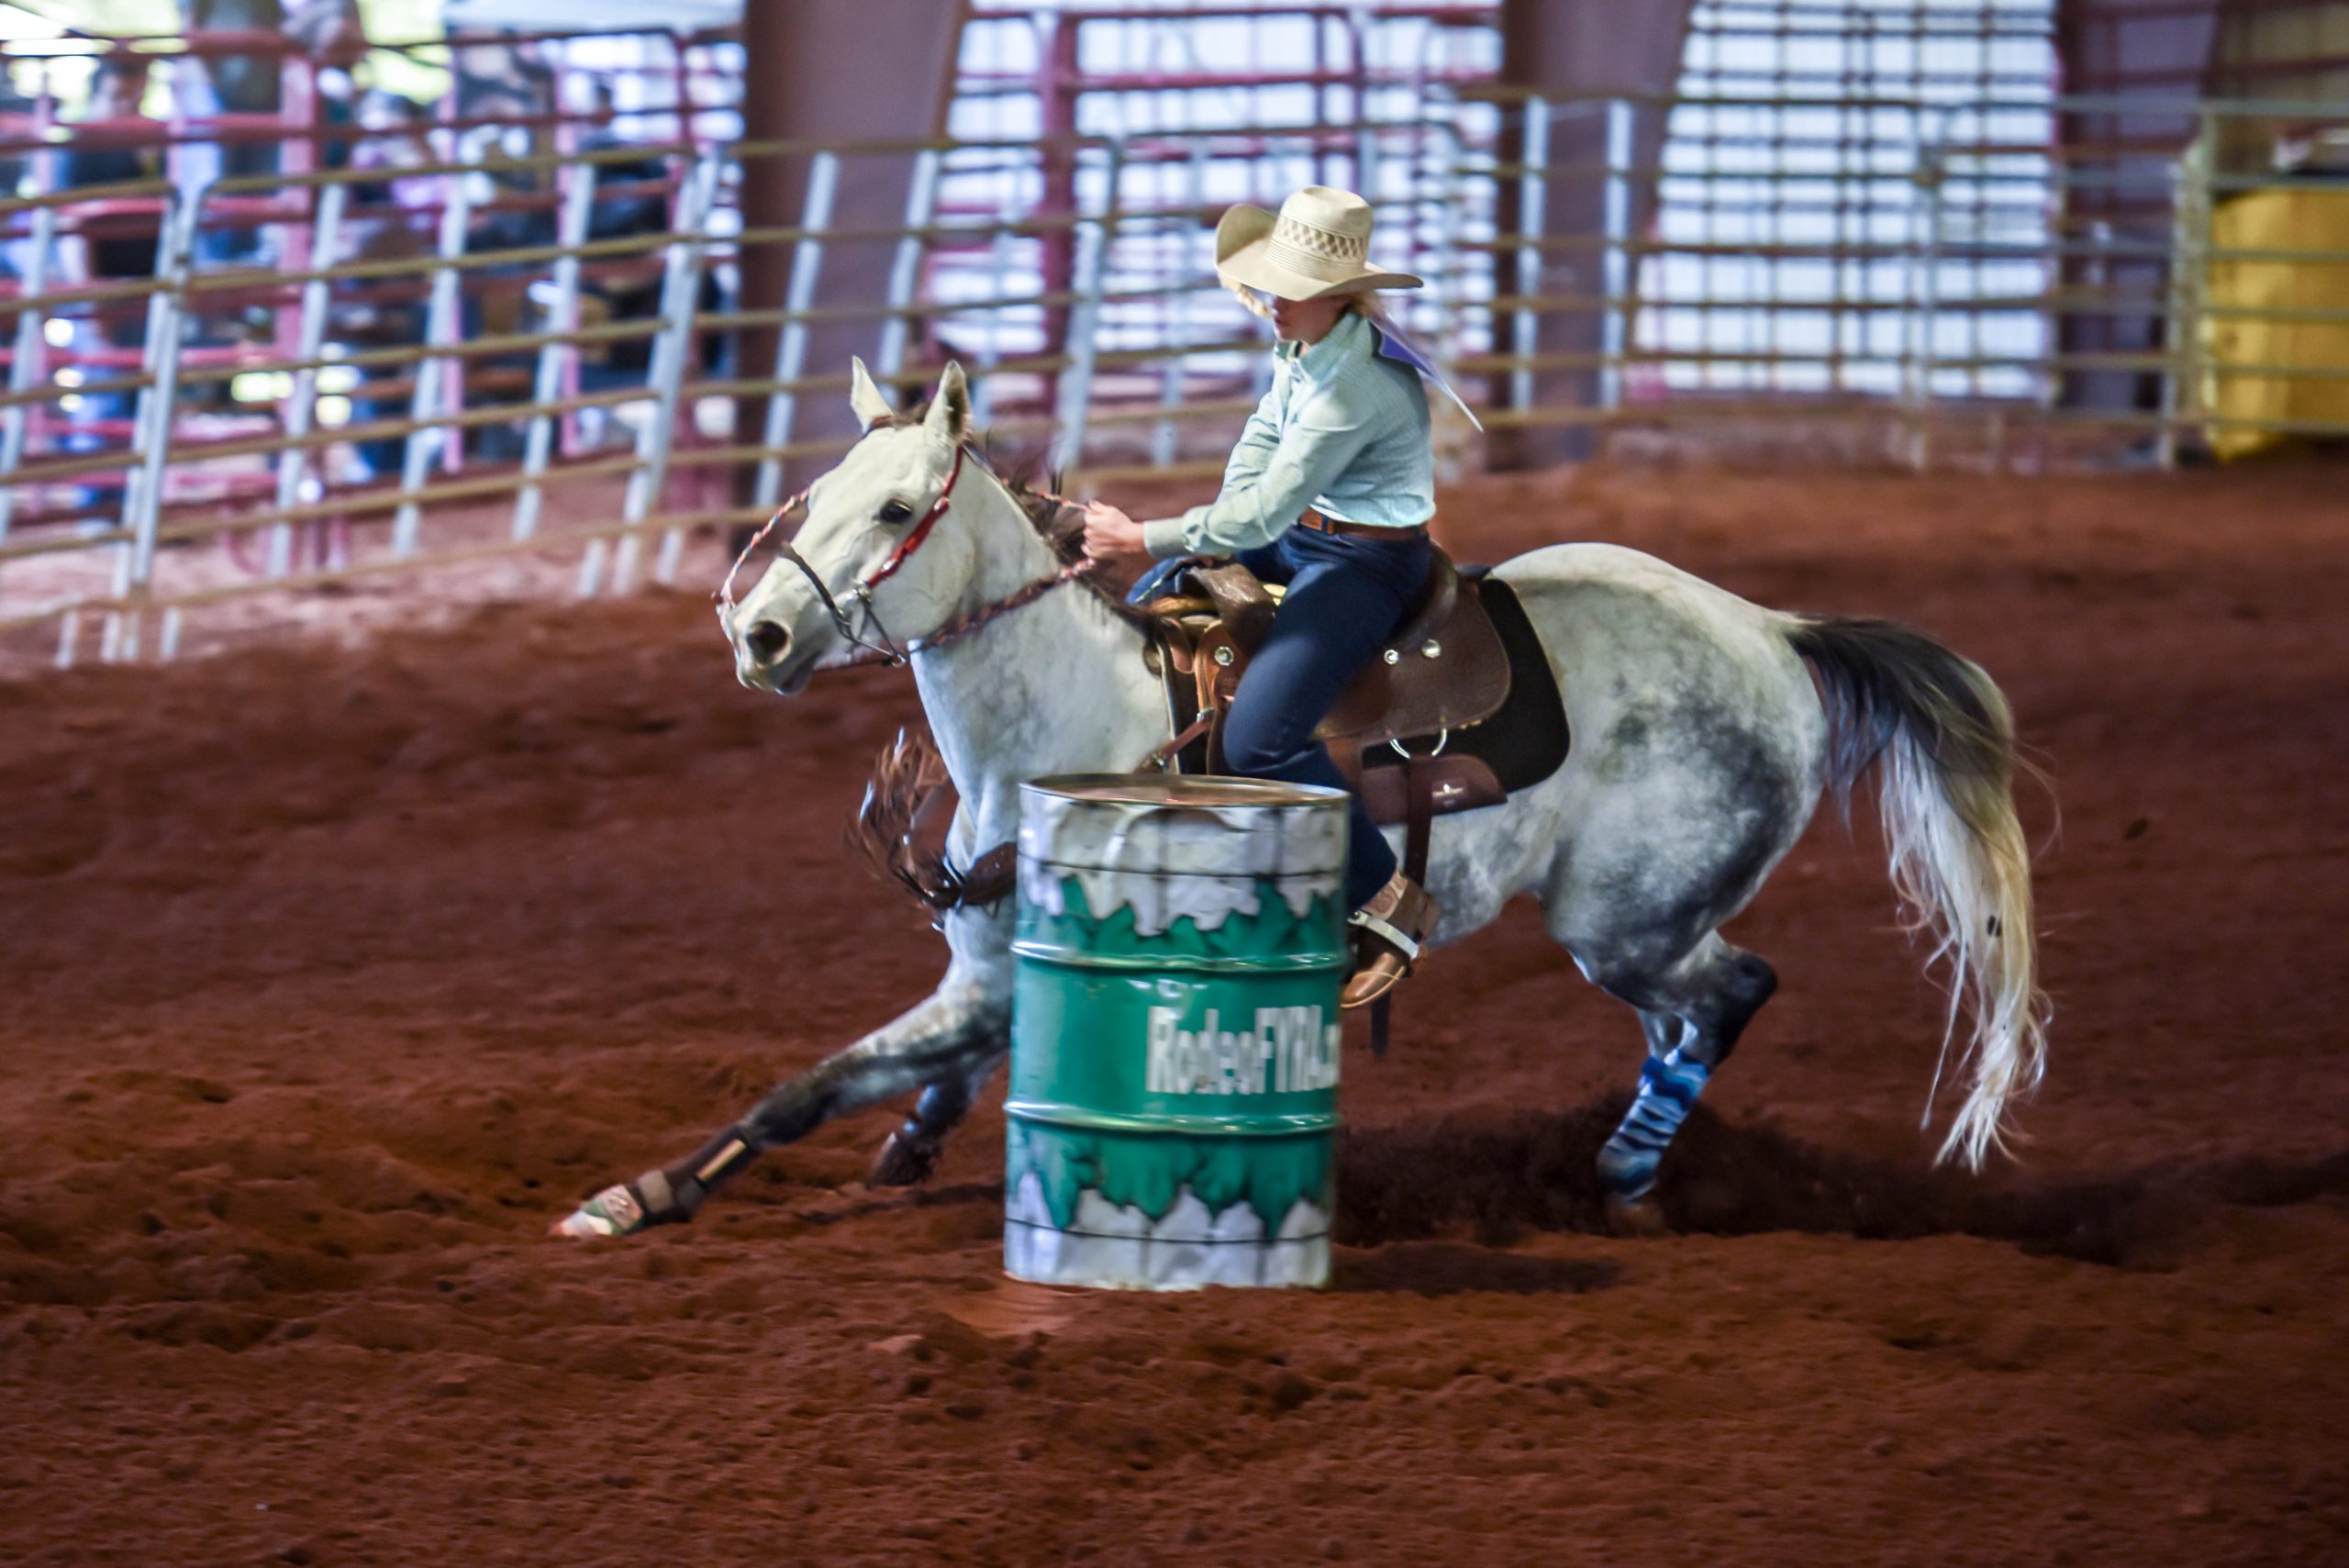 Kathryne Marion Copeland in 2019 at Double J Arena in Pendleton, South Carolina, where she won the first and second round along with the average for the weekend and the year-end title. Kathryne is riding her American quarter horse, Nick. 